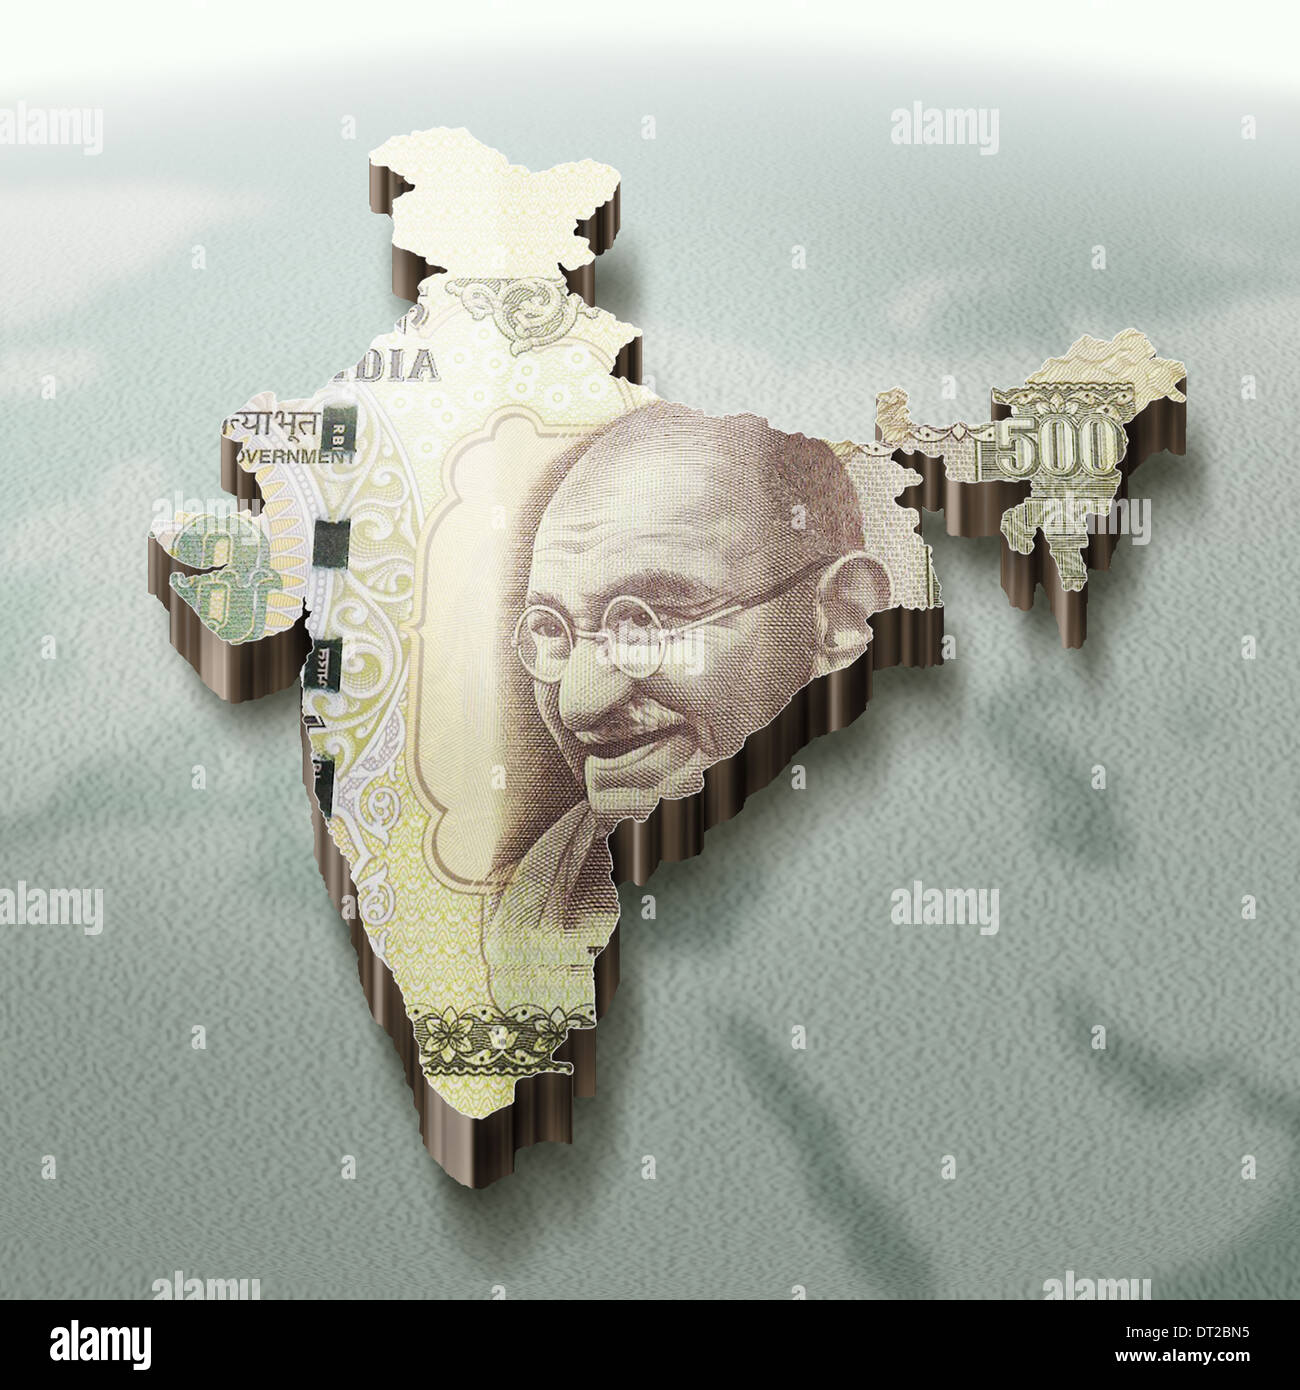 Illustrative image of Indian map made with rupee representing investment Stock Photo